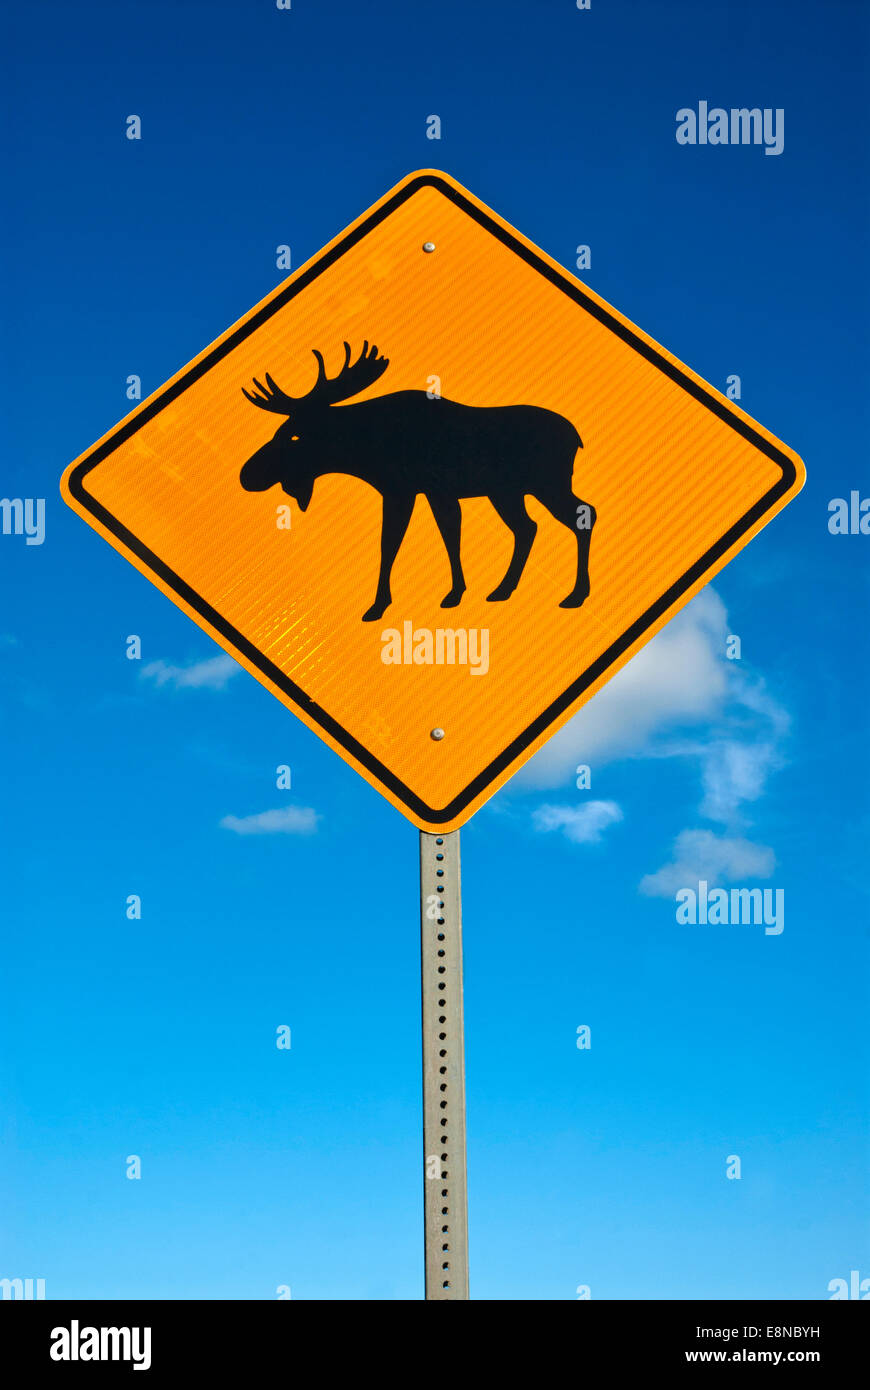 Moose Crossing Sign Banque D'Images